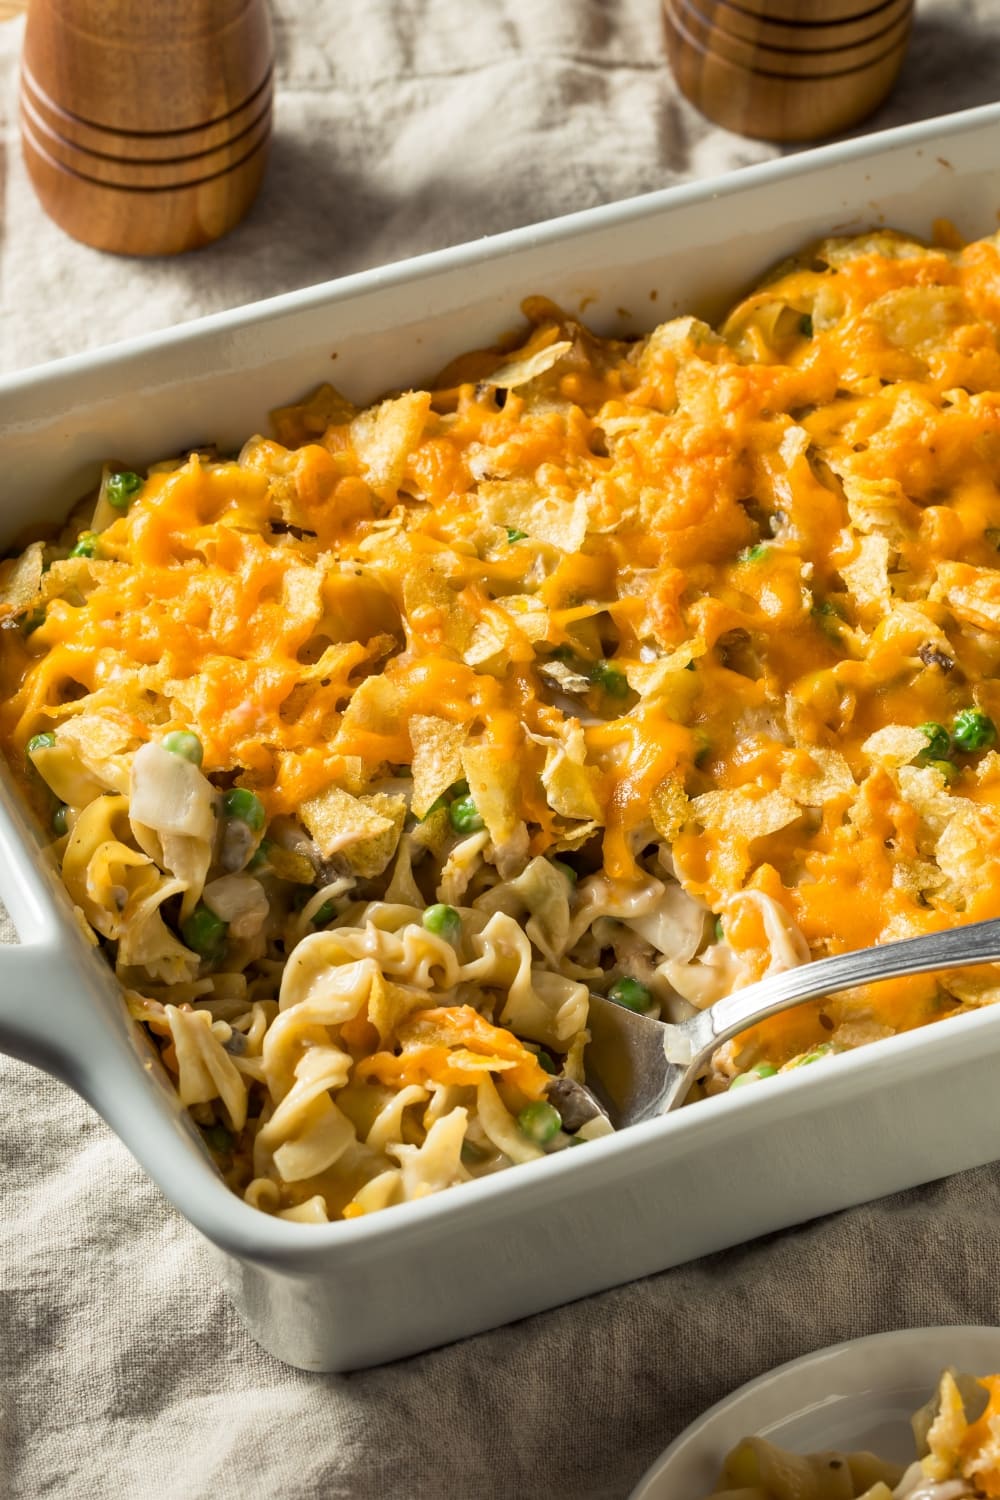 Savory Chicken Noodle Casserole Loaded With Veggies And Topped With Crispy Bacon Bits.